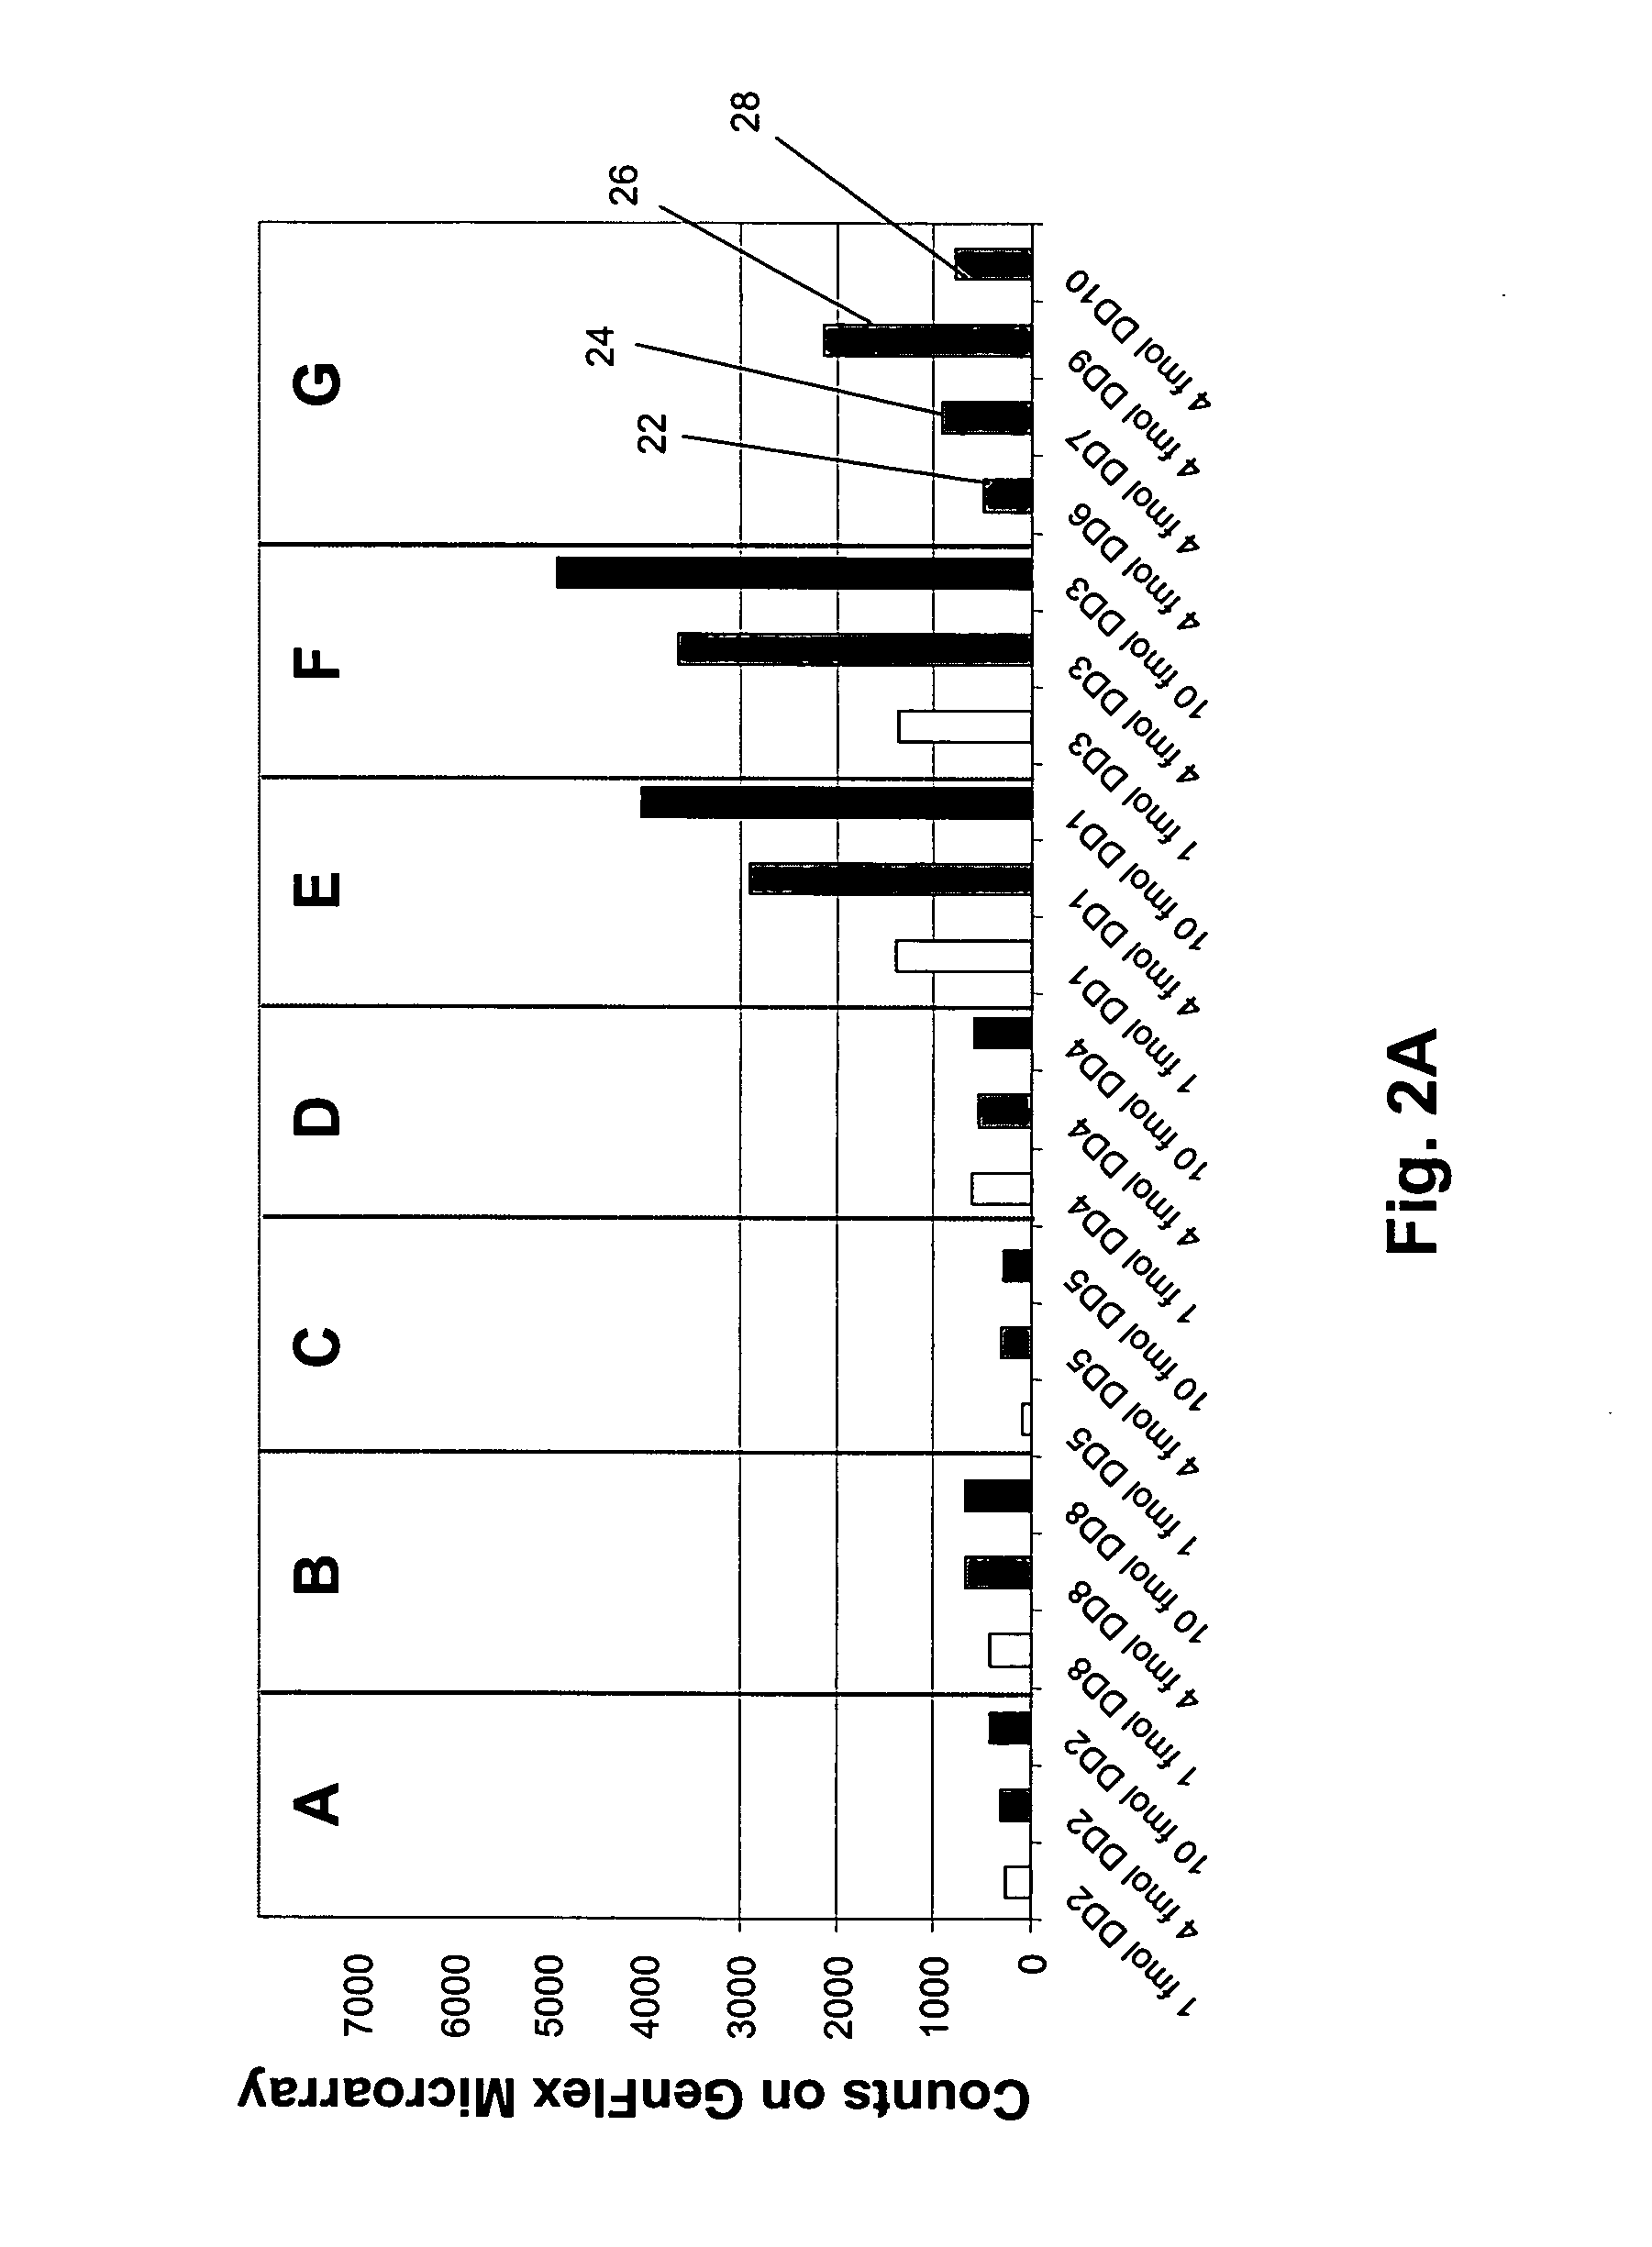 System and methods for enhancing signal-to-noise ratios of microarray-based measurements